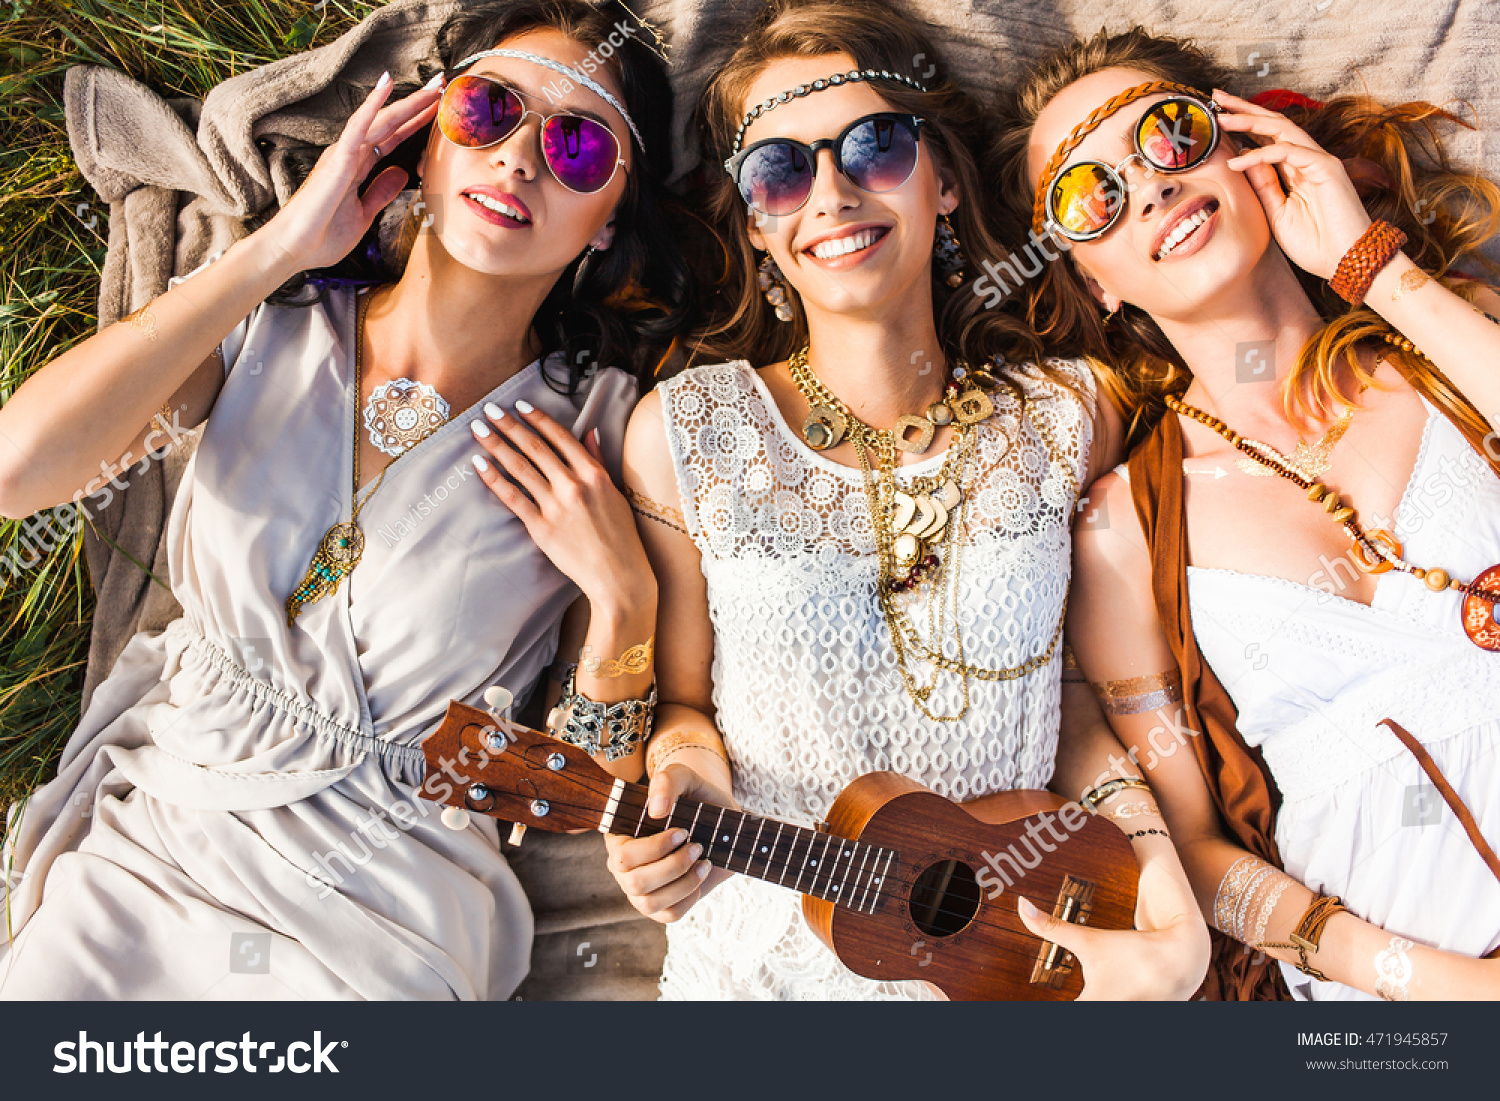 Three cute hippie girl lying on the plaid outdoors, best friends having fun and laughing, play ukulele, sunglasses, feathers in their hair, bracelets, flash tattoo, indie, Bohemia, boho style top view #471945857